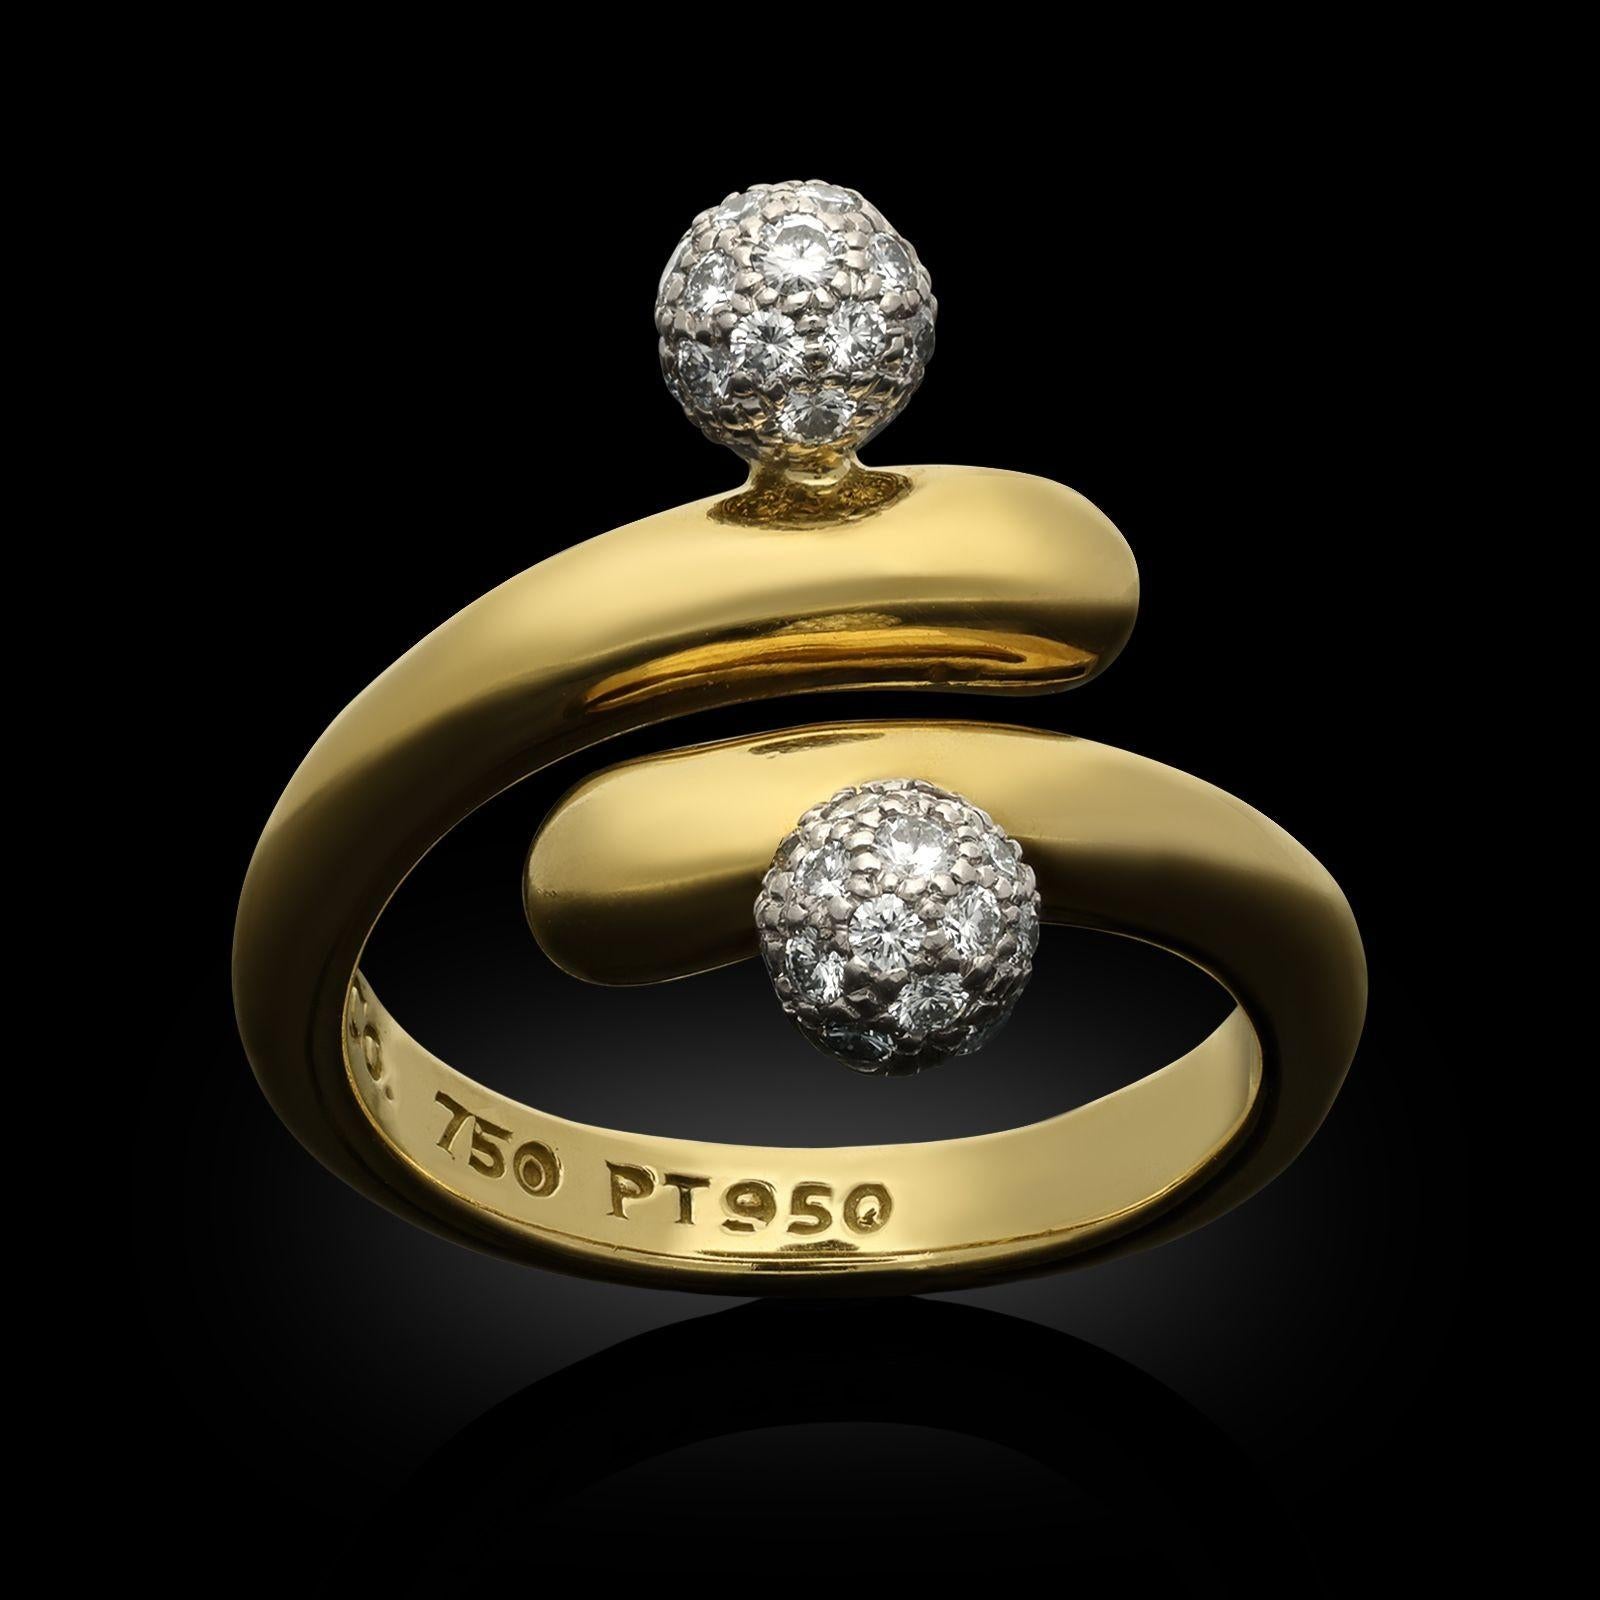 A vintage 18ct yellow gold and diamond crossover ring by Tiffany & Co. circa 1980. The ring is designed as a stylised crossover with two diamond pavé set three dimensional platinum spherical accents on the overlapping yellow gold band.
Maker
Tiffany